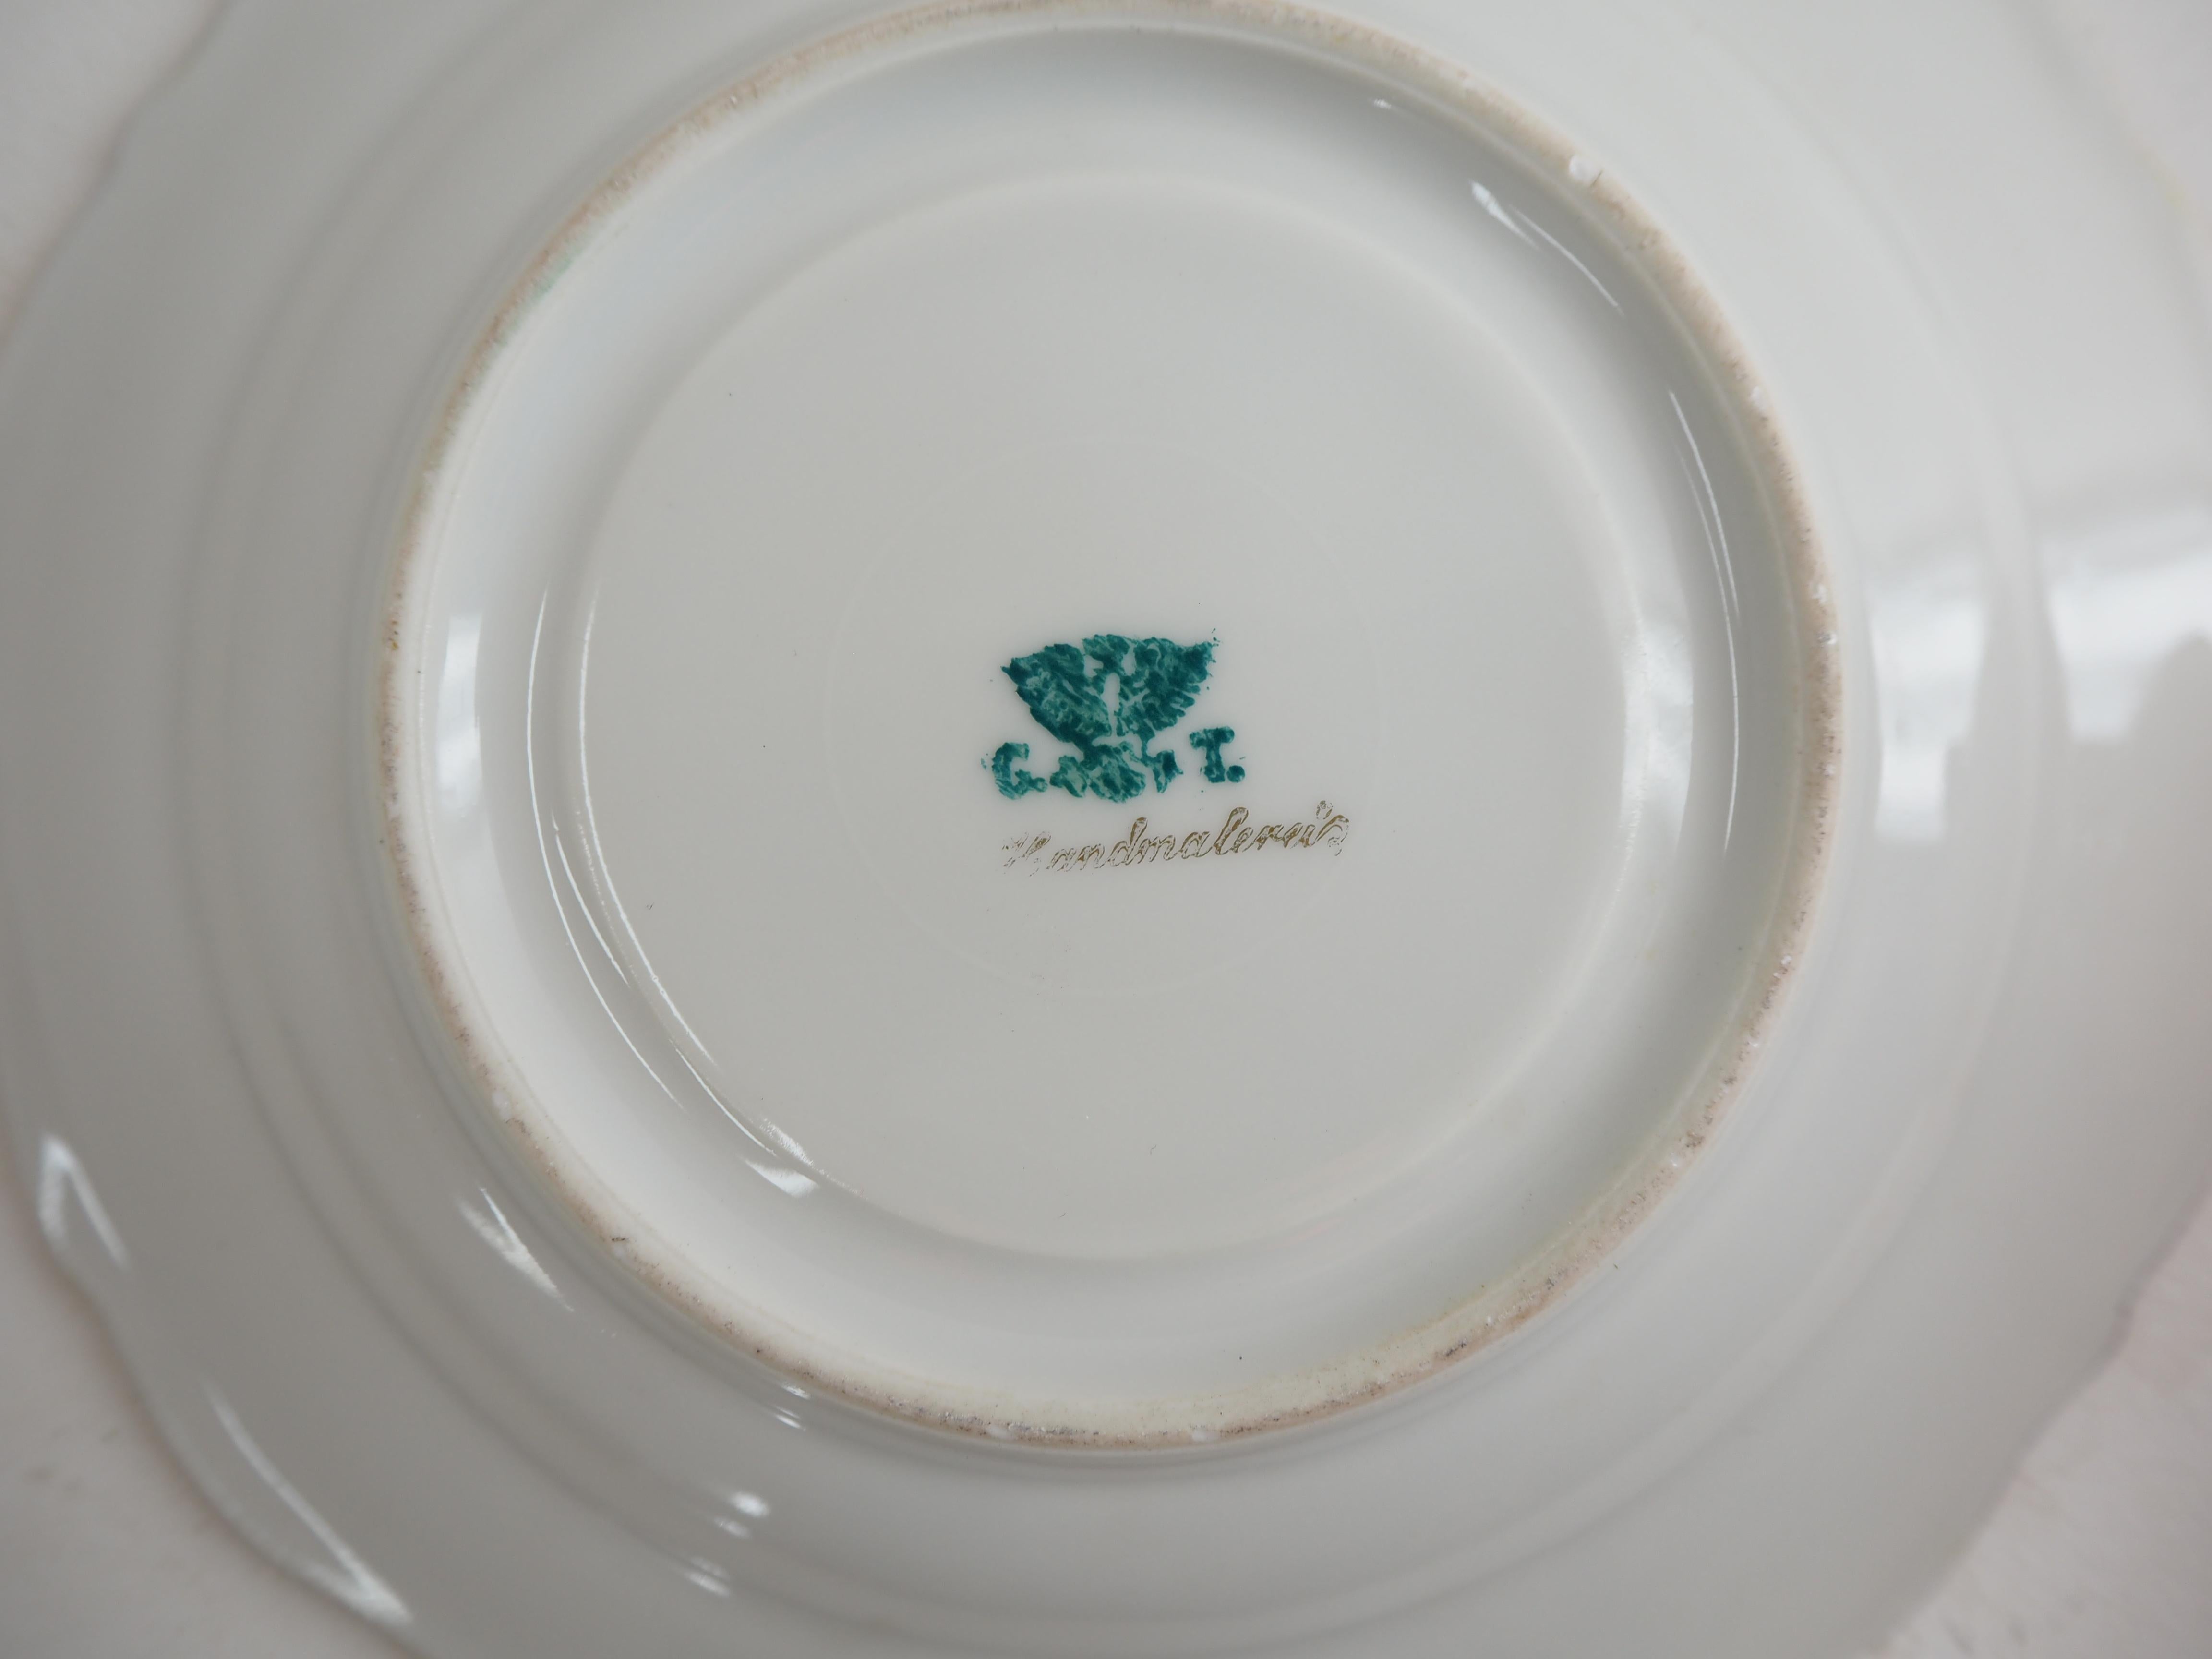 Carlsbad Breakfast Porcelain Coffee Cup, 1910 For Sale 3